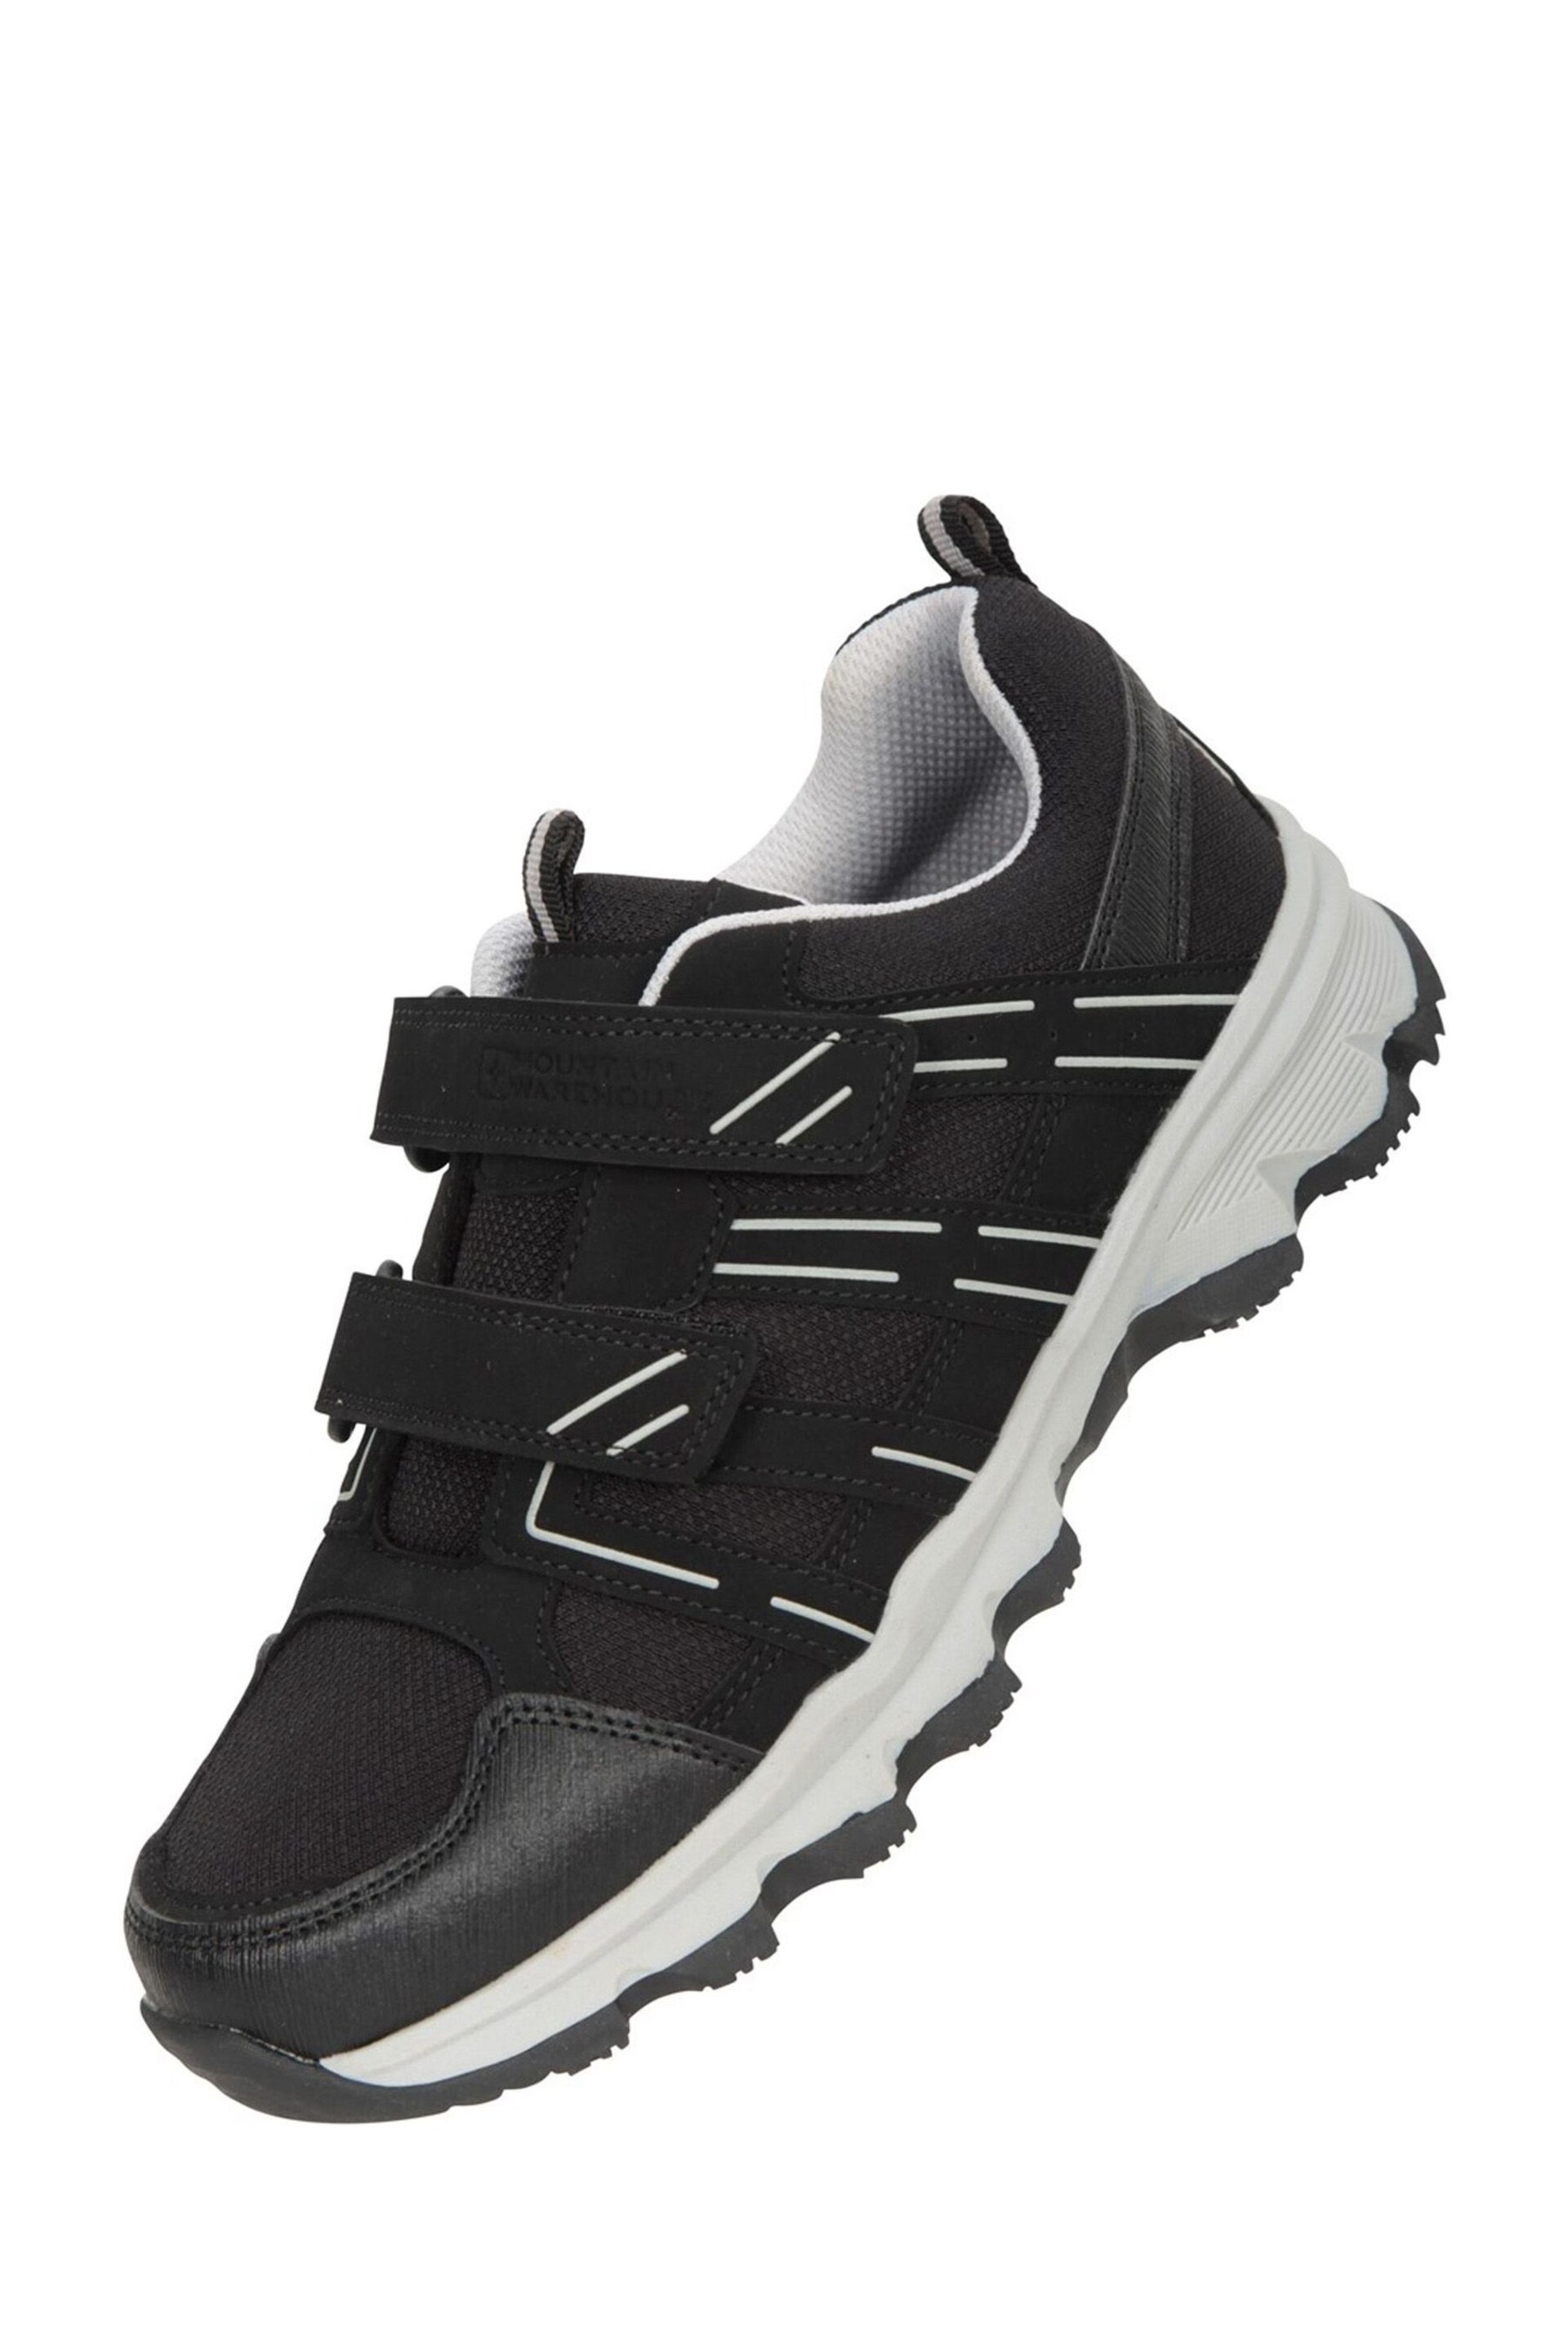 Mountain Warehouse Black Cannonball Kids Walking Shoes - Image 6 of 6